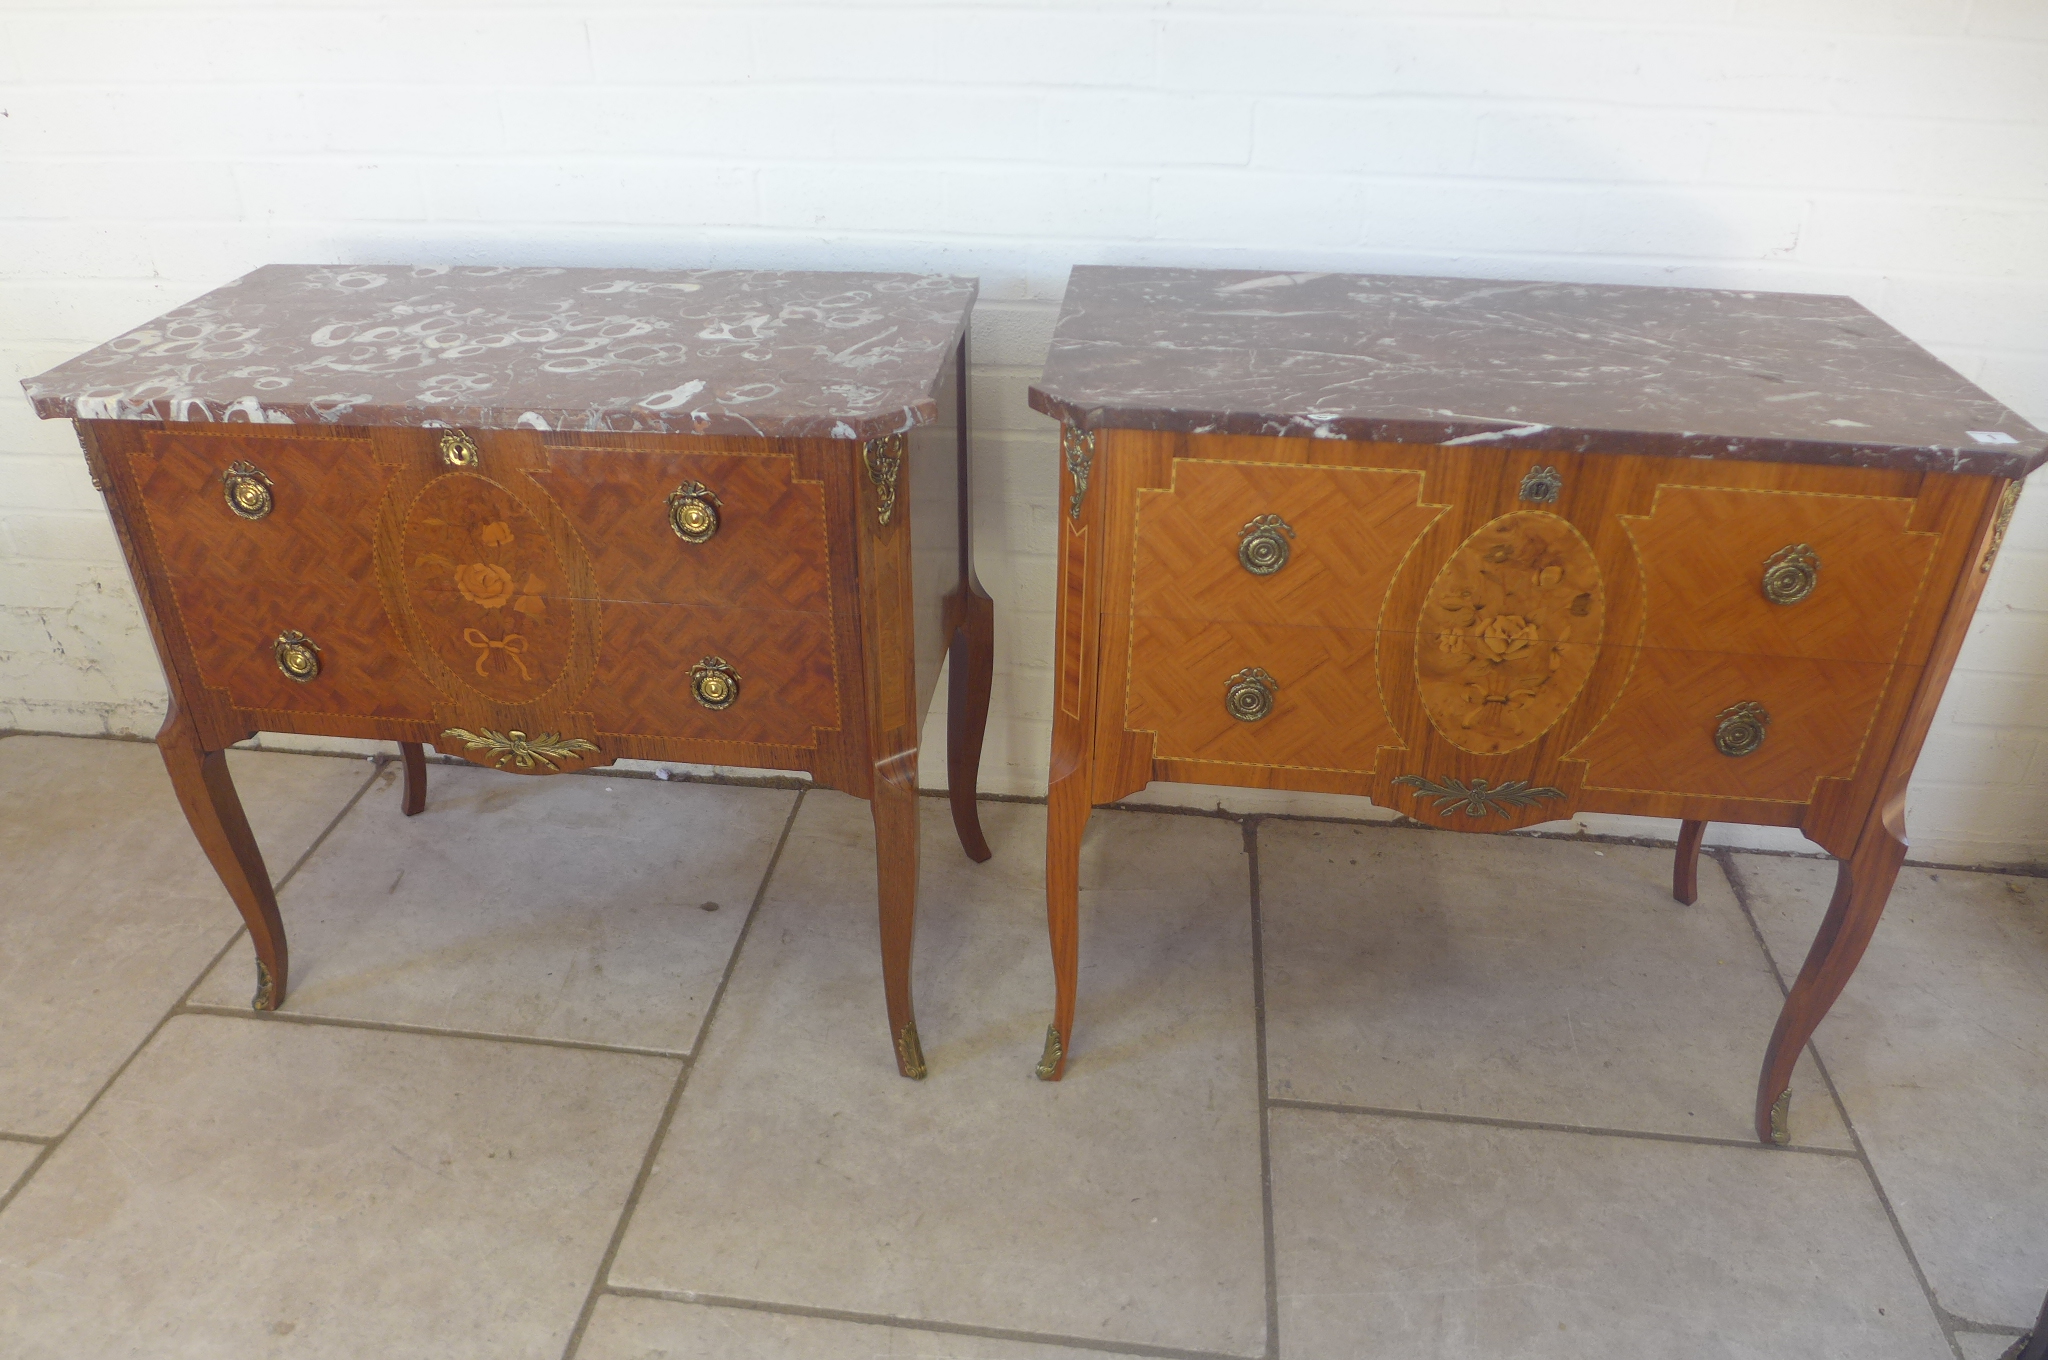 A near pair of walnut and inlaid antique style marble topped chests with two drawers - in very